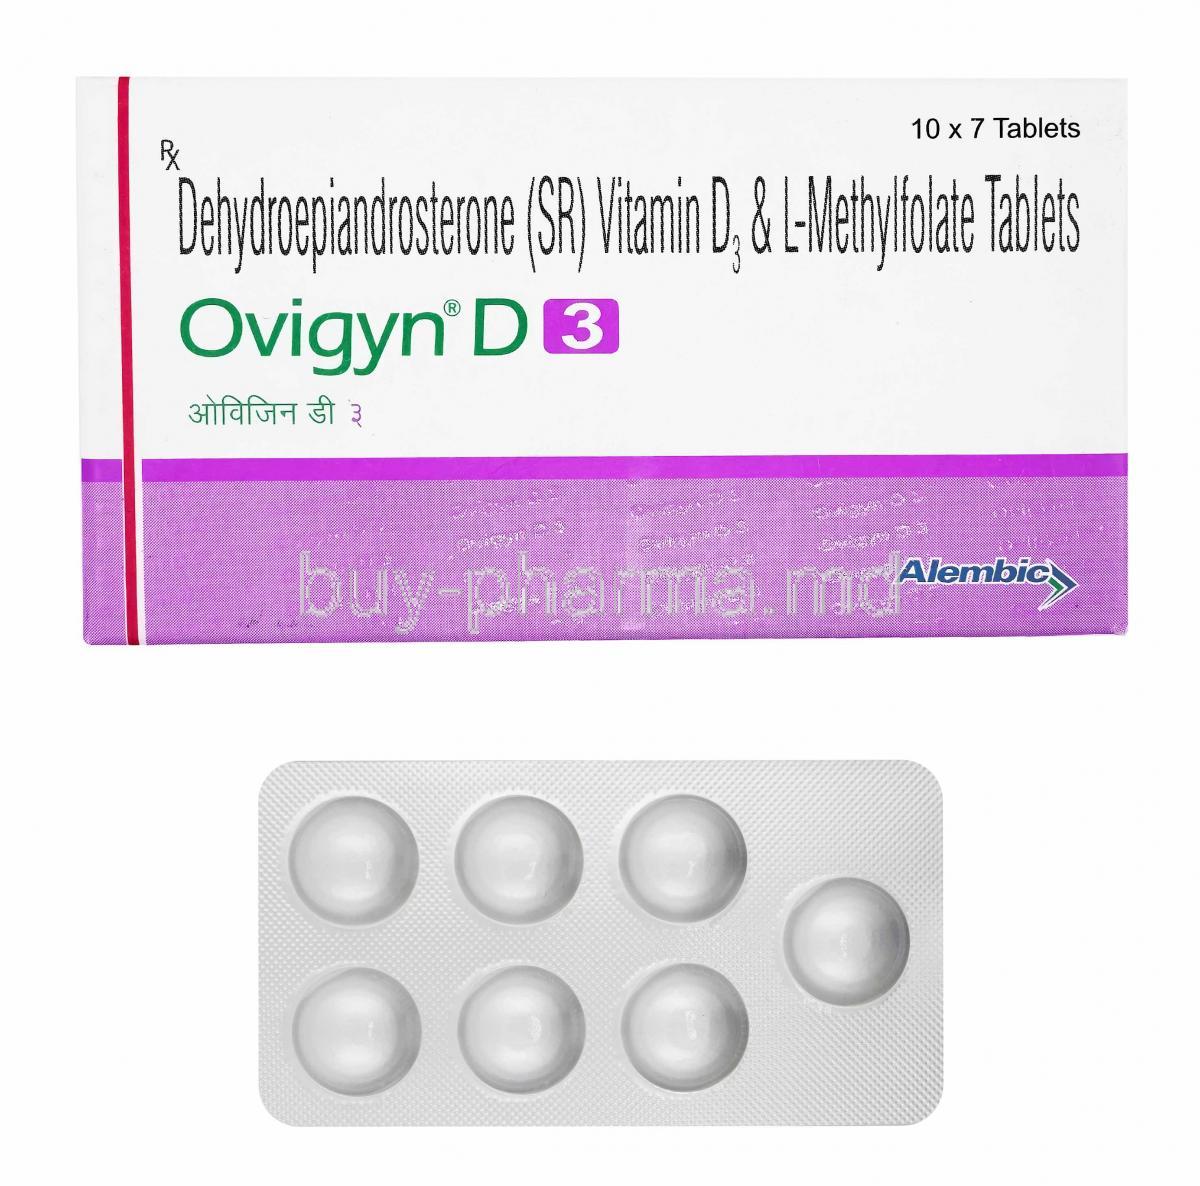 Ovigyn D3, Dehydroepiandrosterone, L-Methyl Folate and Vitamin D3 box and tablets